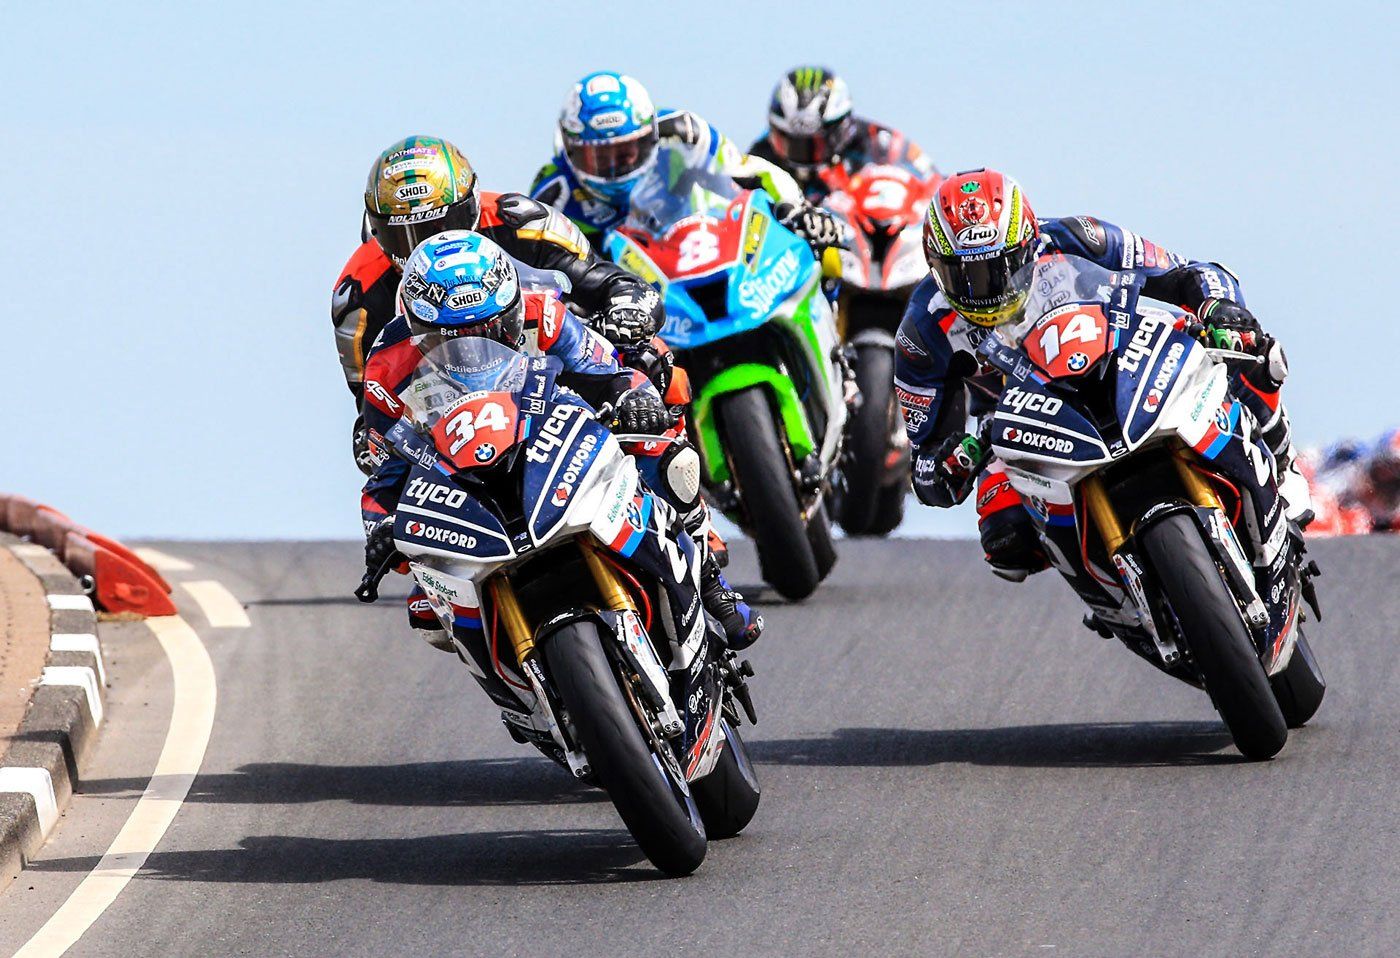 North West Motorcycle Race Image From International